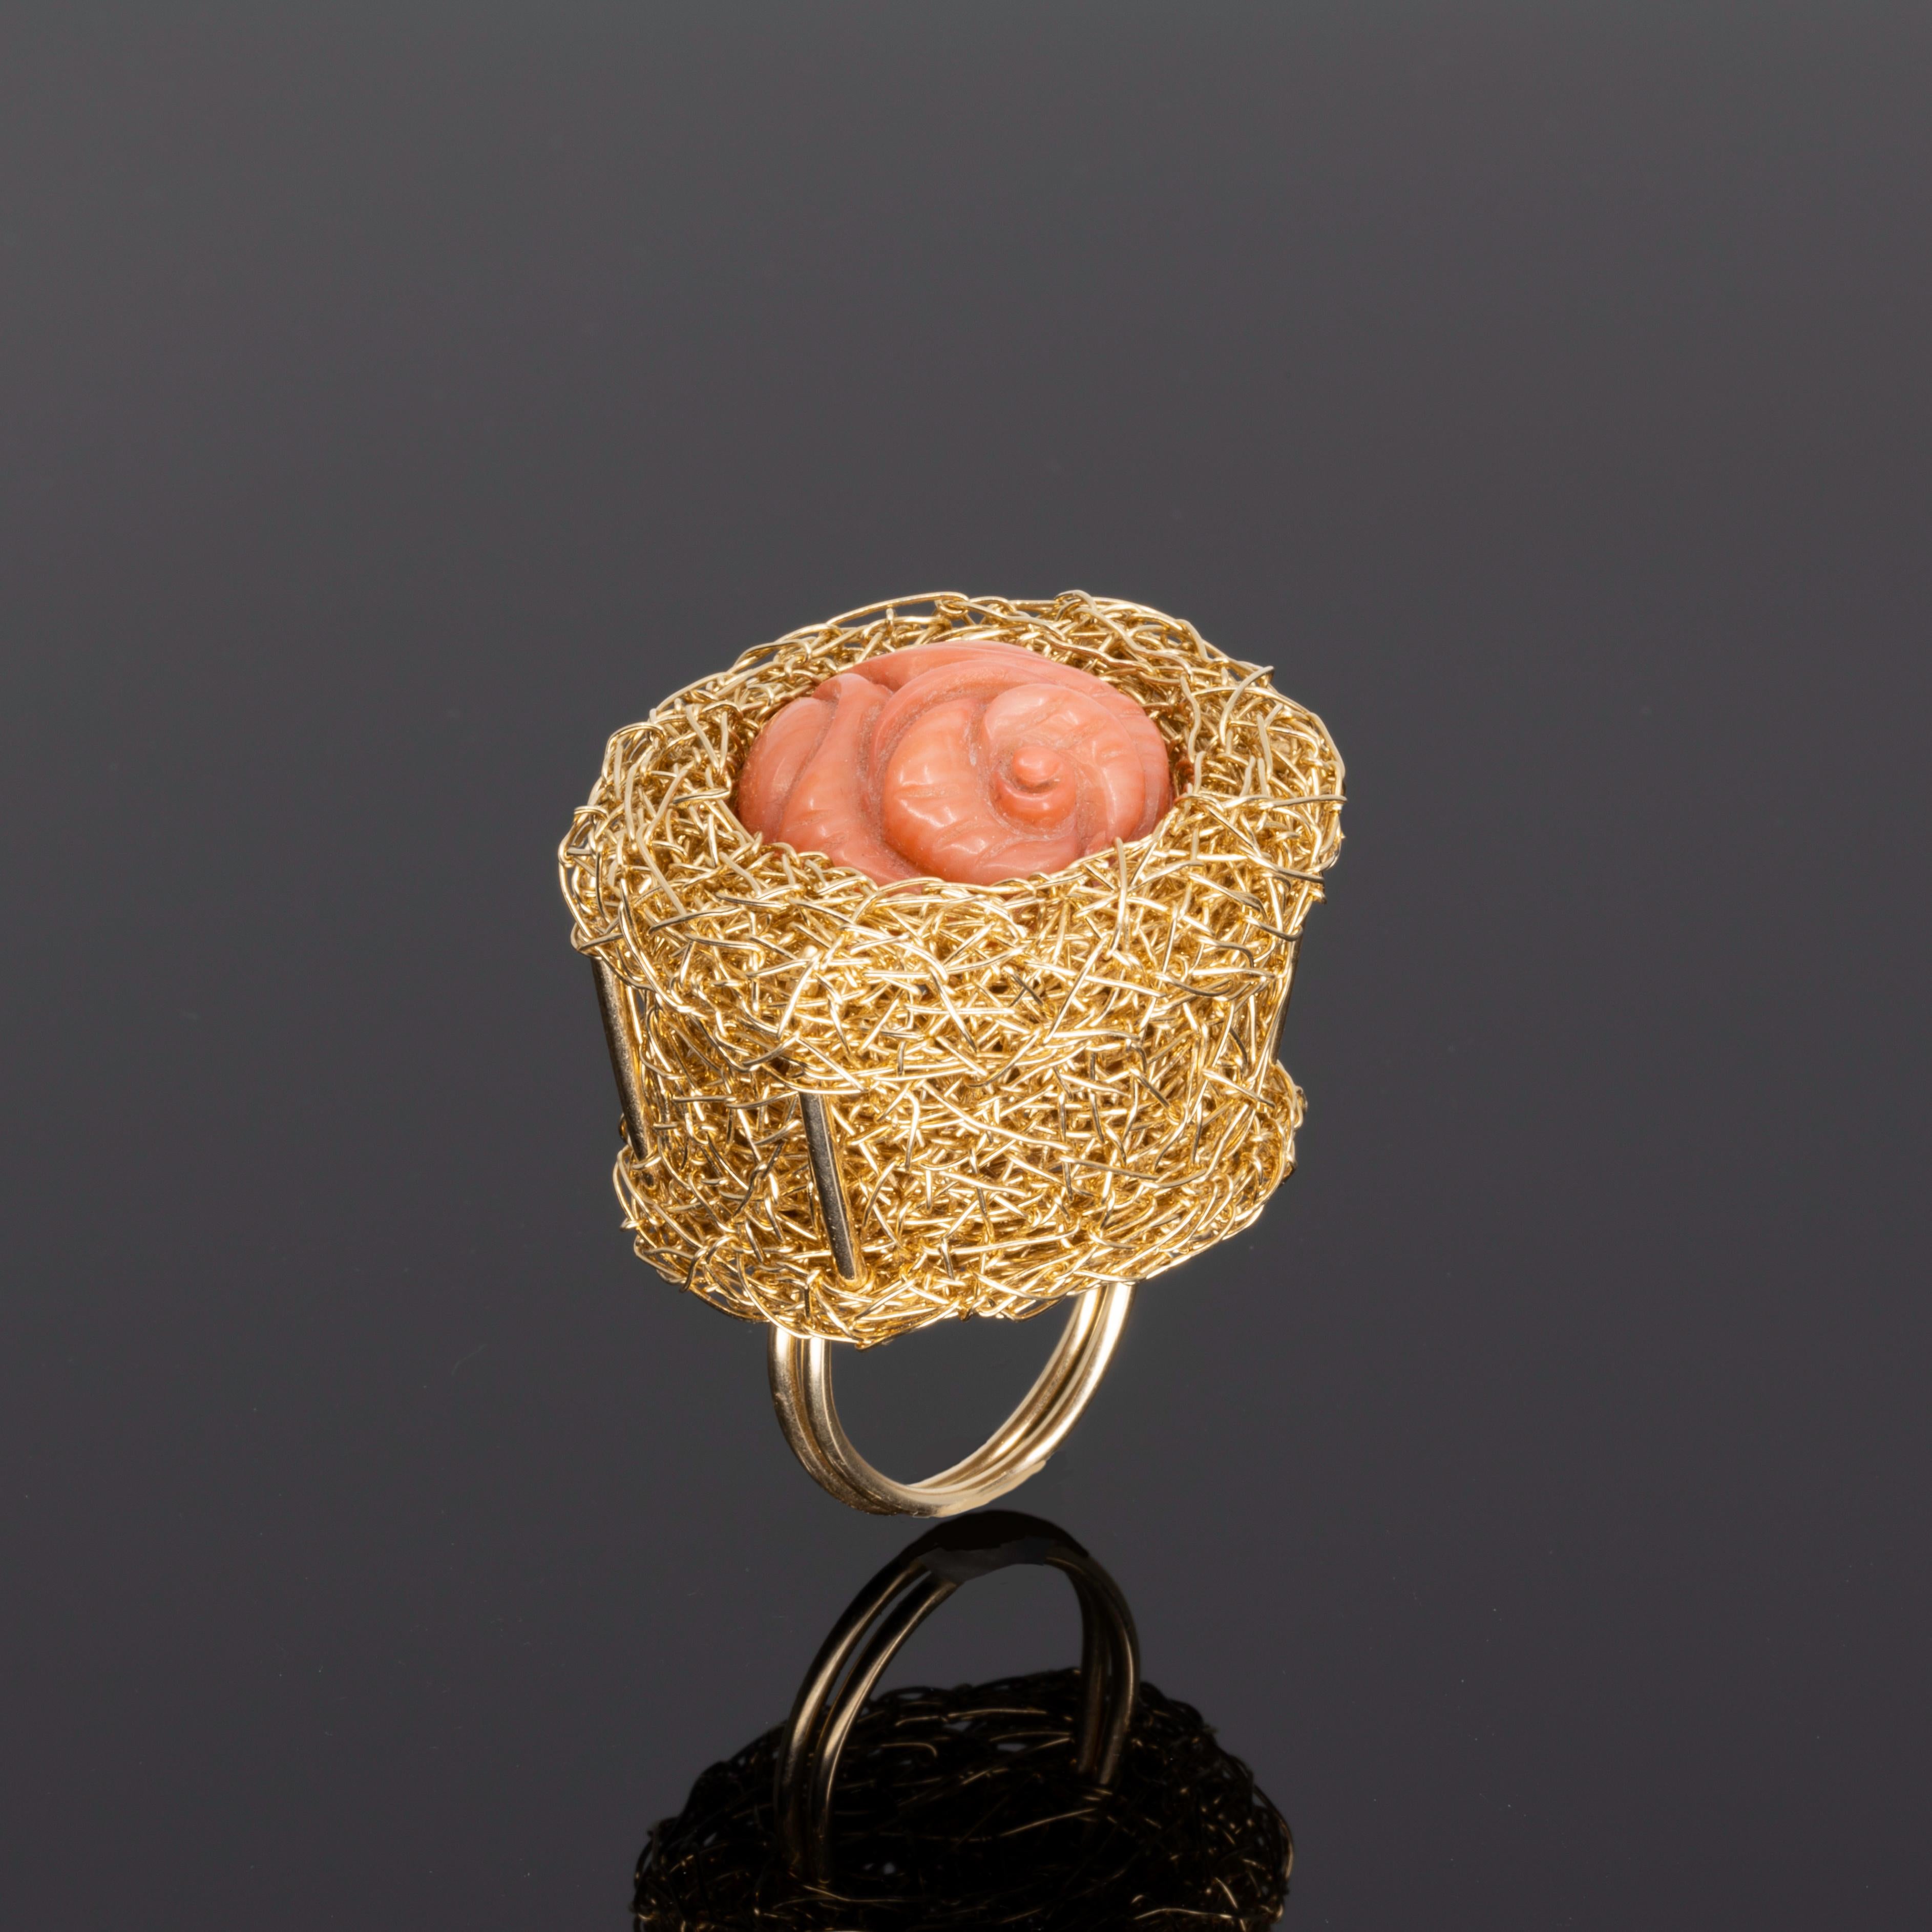 Artist Statement Coral Basked Jewel in 14k Gold Filled Woven Cocktail Ring 3